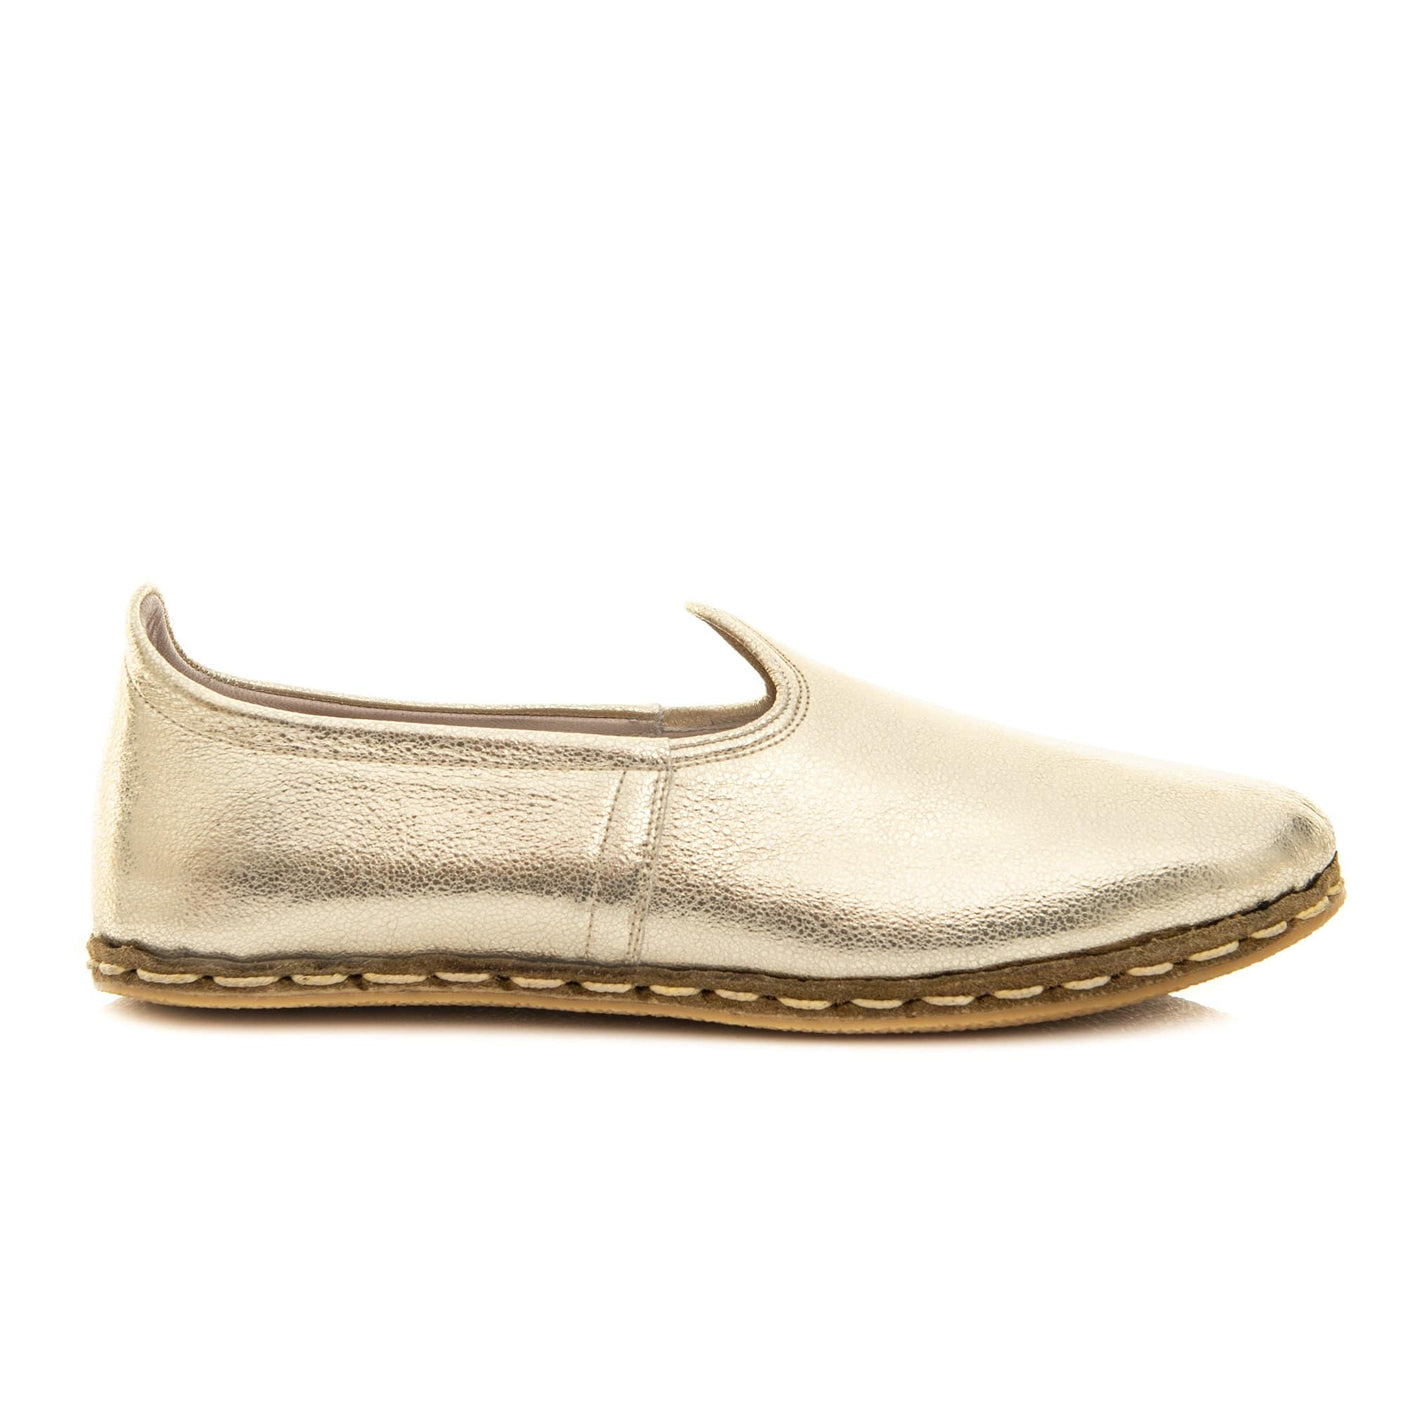 Men's Leather Gold Slip On Shoes